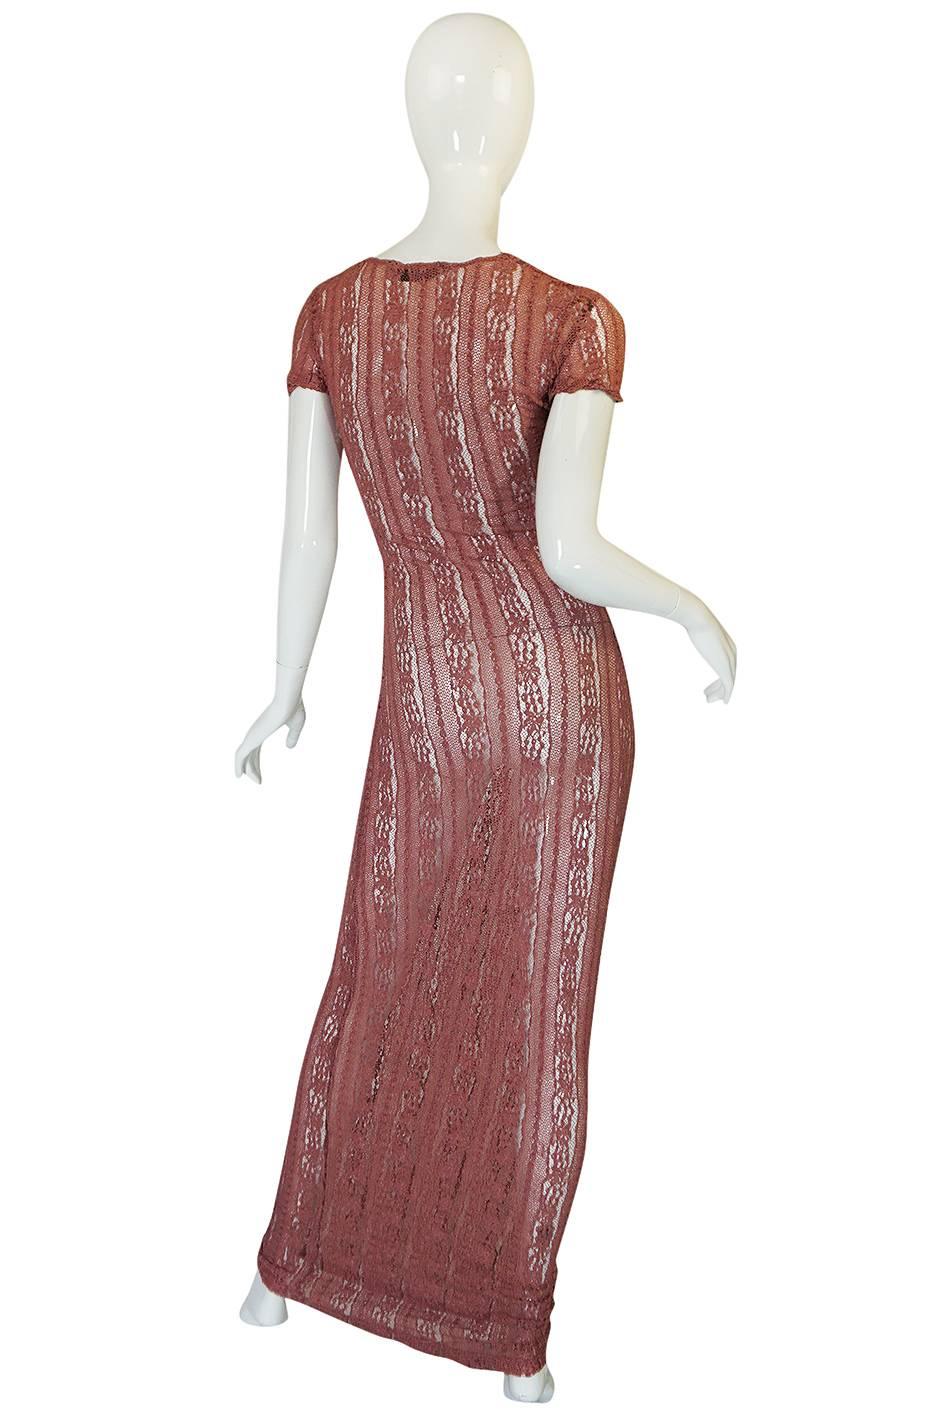 

This dress is from Galliano's main line and dates to the nineties - which one can see not only from the version of his label seen inside in the dress but readily in the lines of the dress itself. It's long lean silhouette and fitted body-con cut